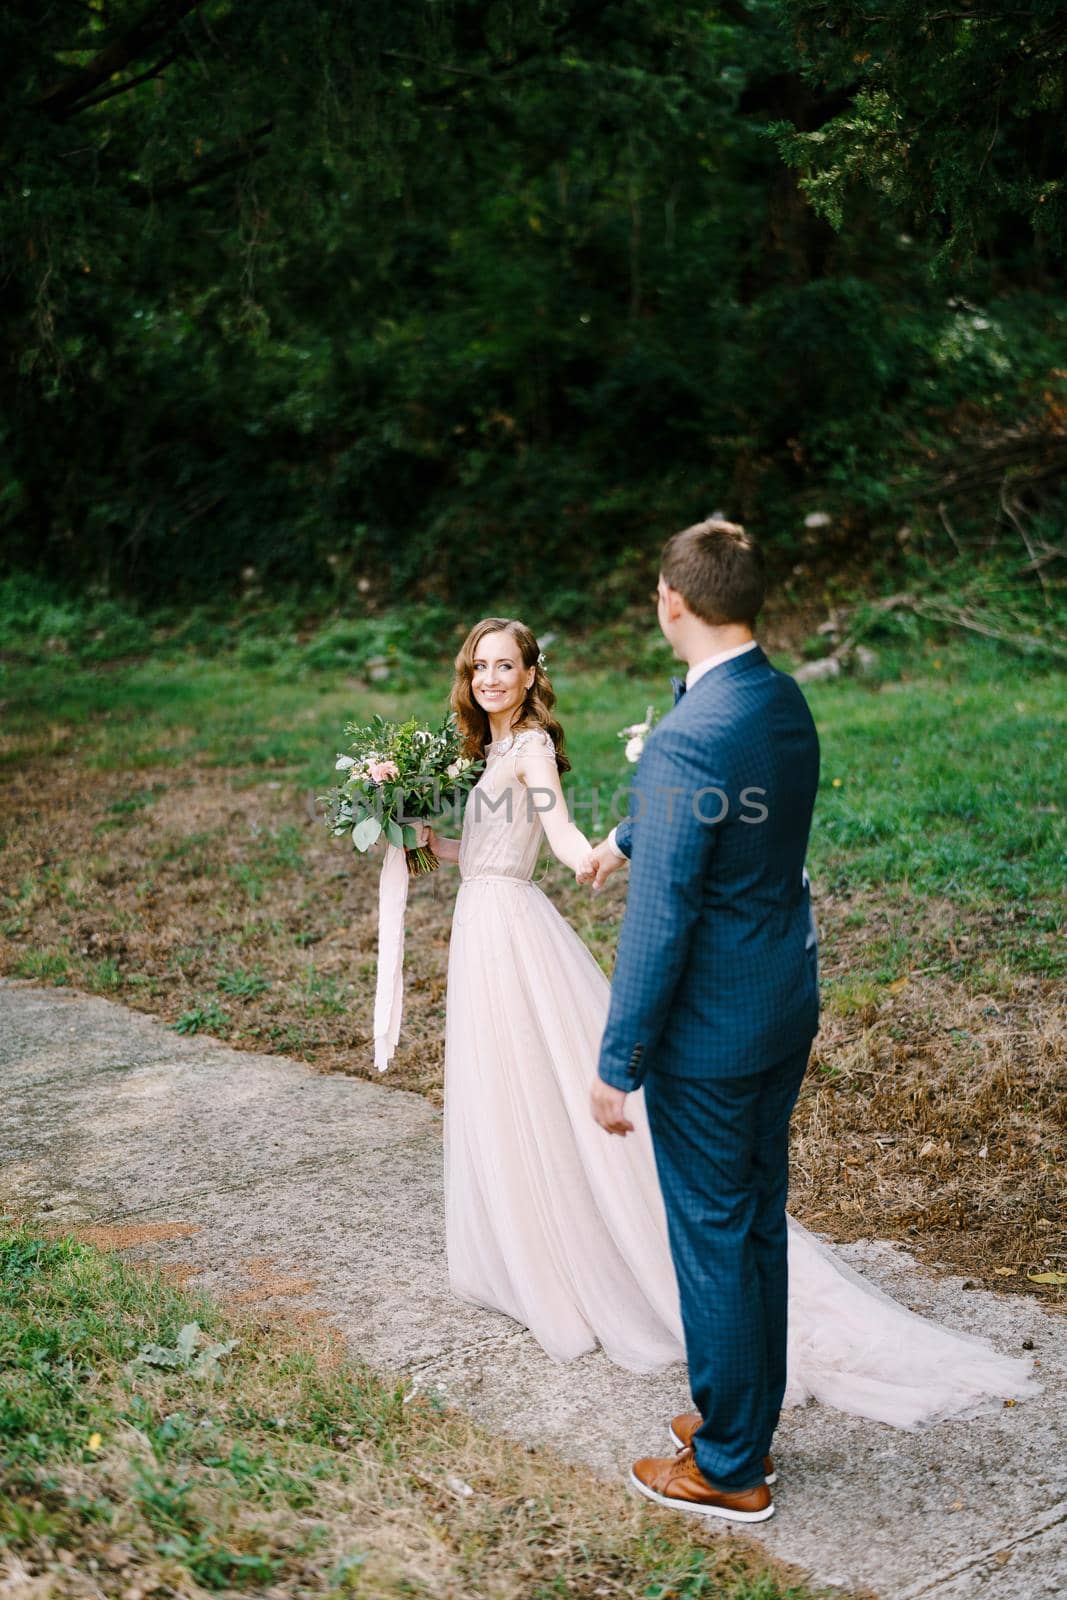 Smiling bride with a bouquet pulls the groom hand along the path in the garden. High quality photo